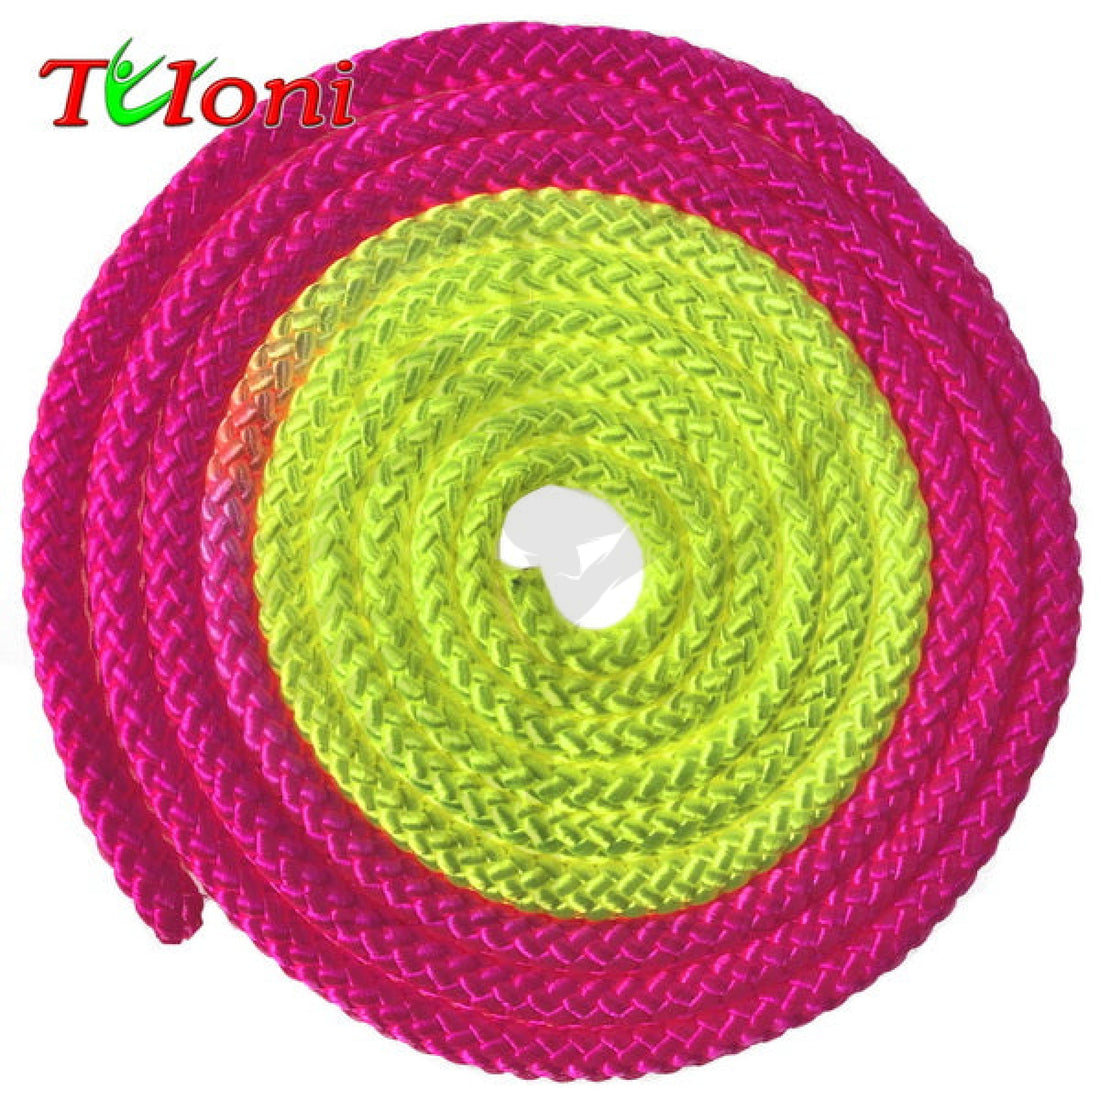 Tuloni Multicolour Rope 3M Neon Pink X Yellow Ropes